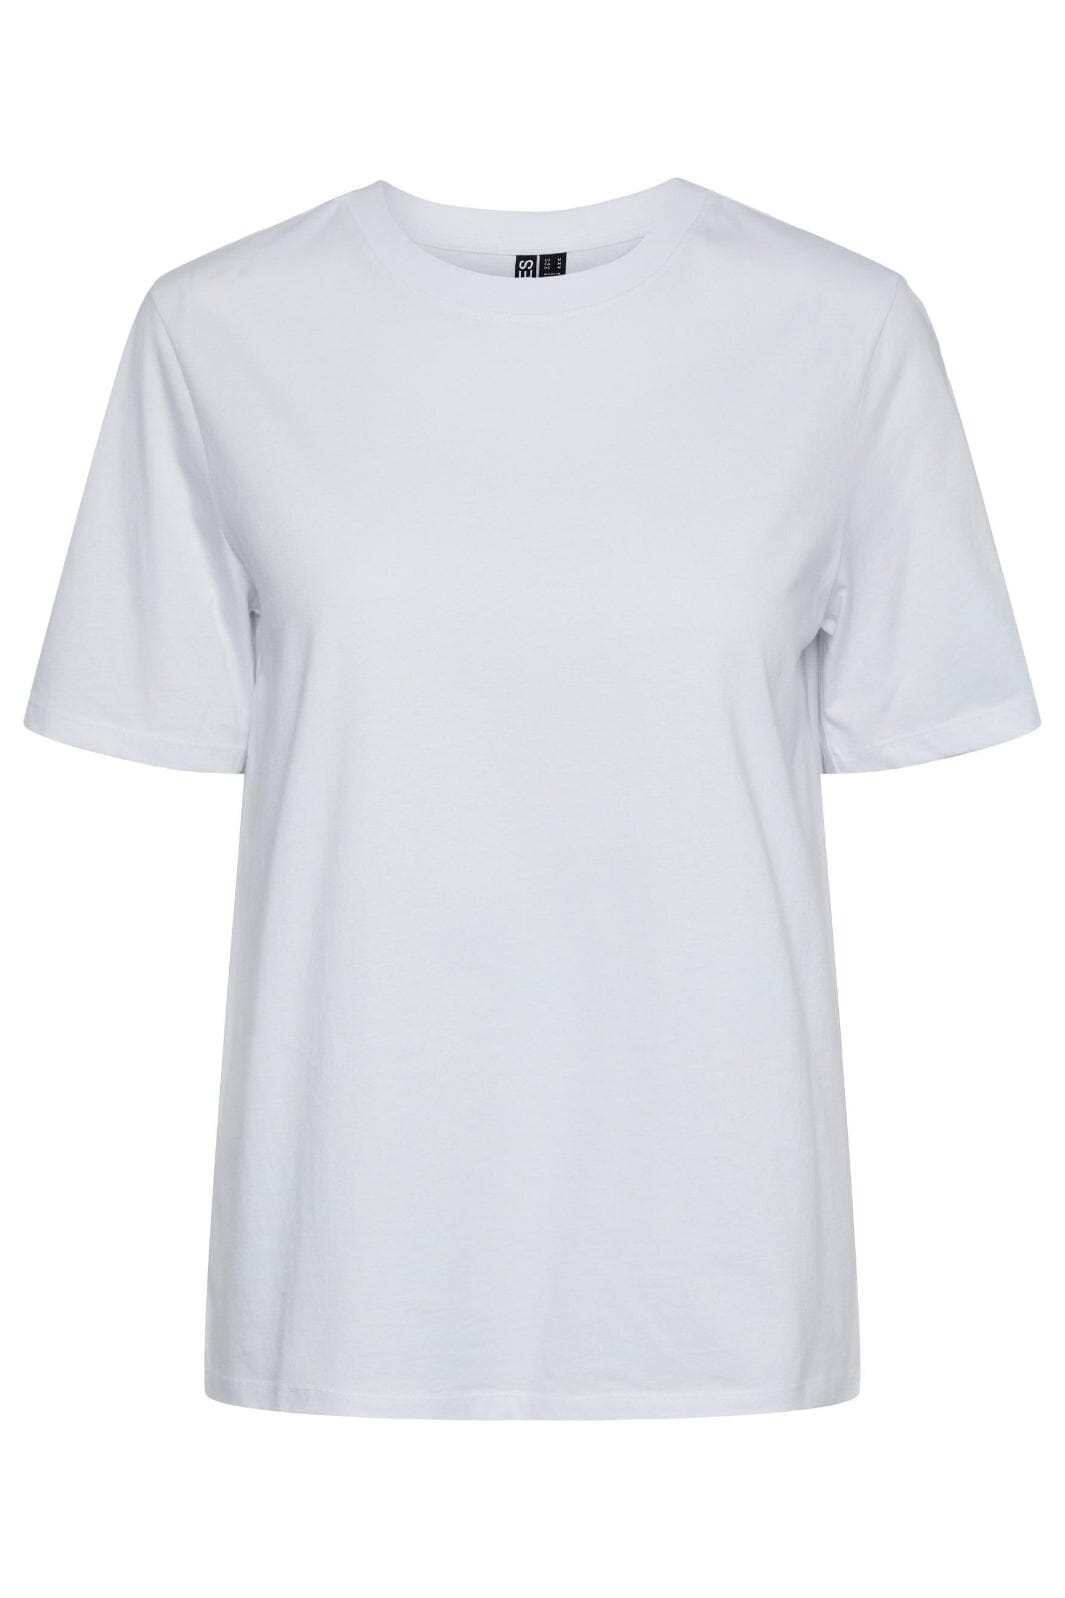 Pieces - Pcria Ss Solid Tee - 4280157 Bright White T-shirts 